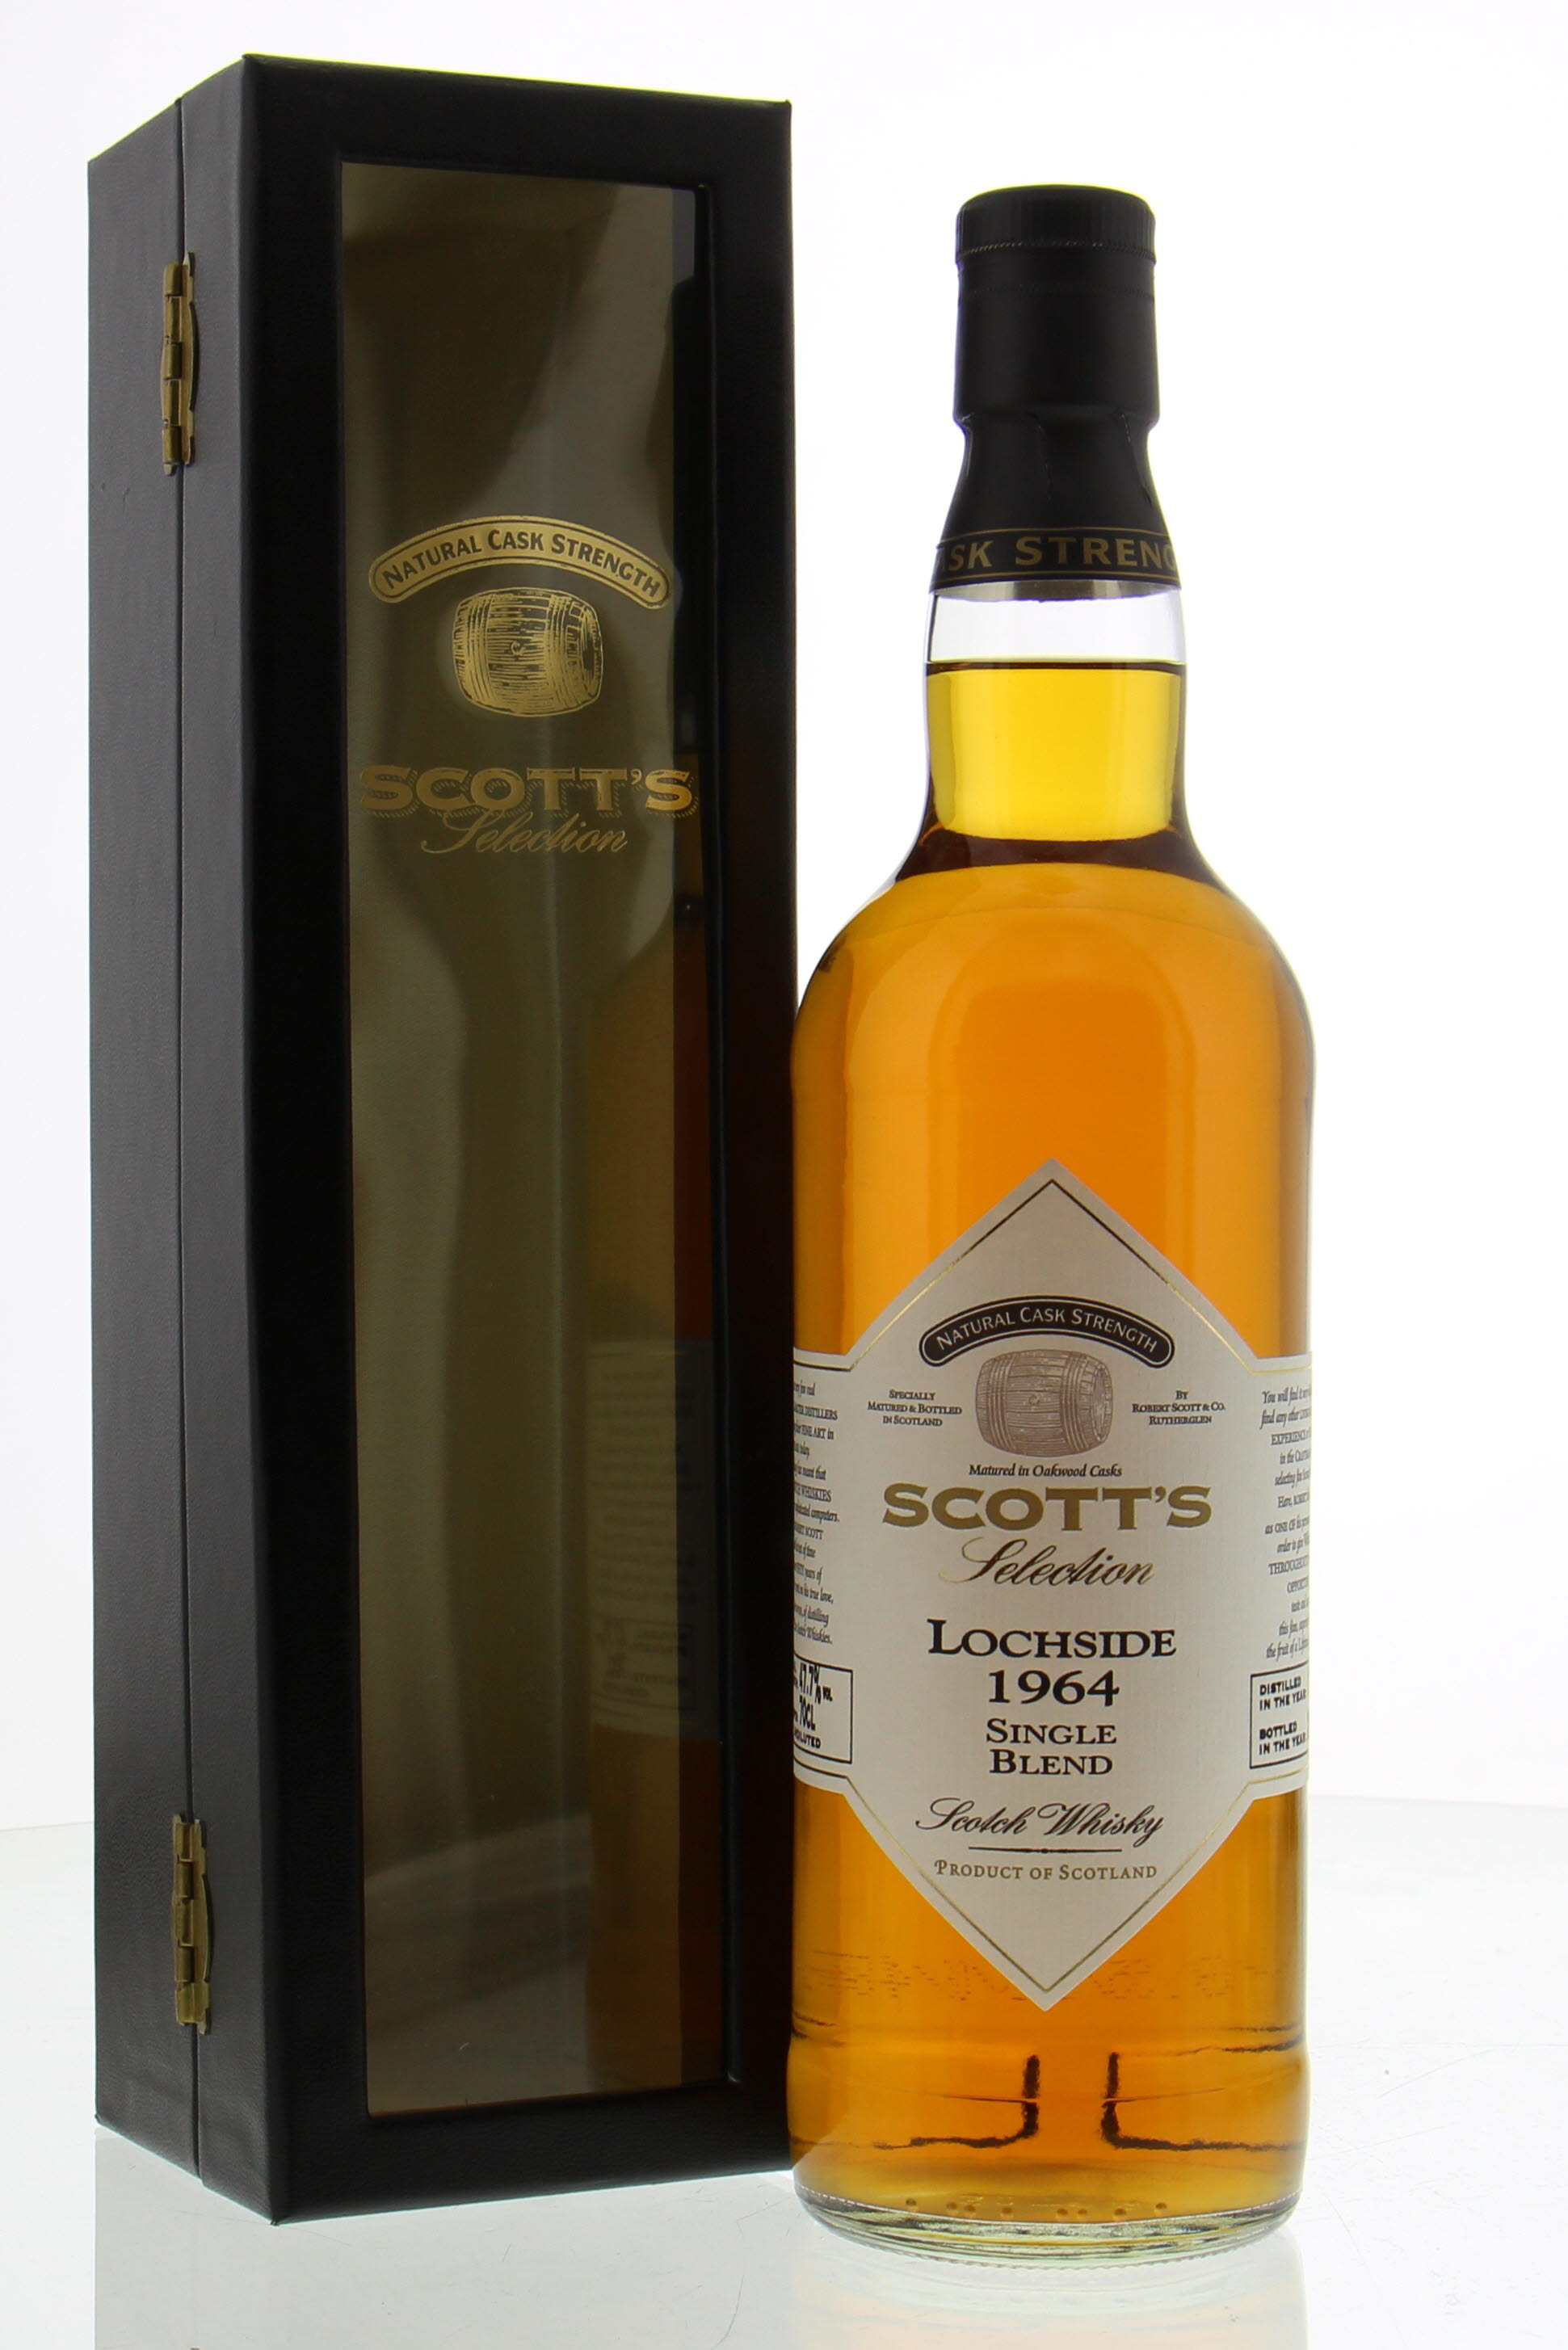 Lochside - 42 Years Old Scott's Selection 47.7% 1964 In Original Container